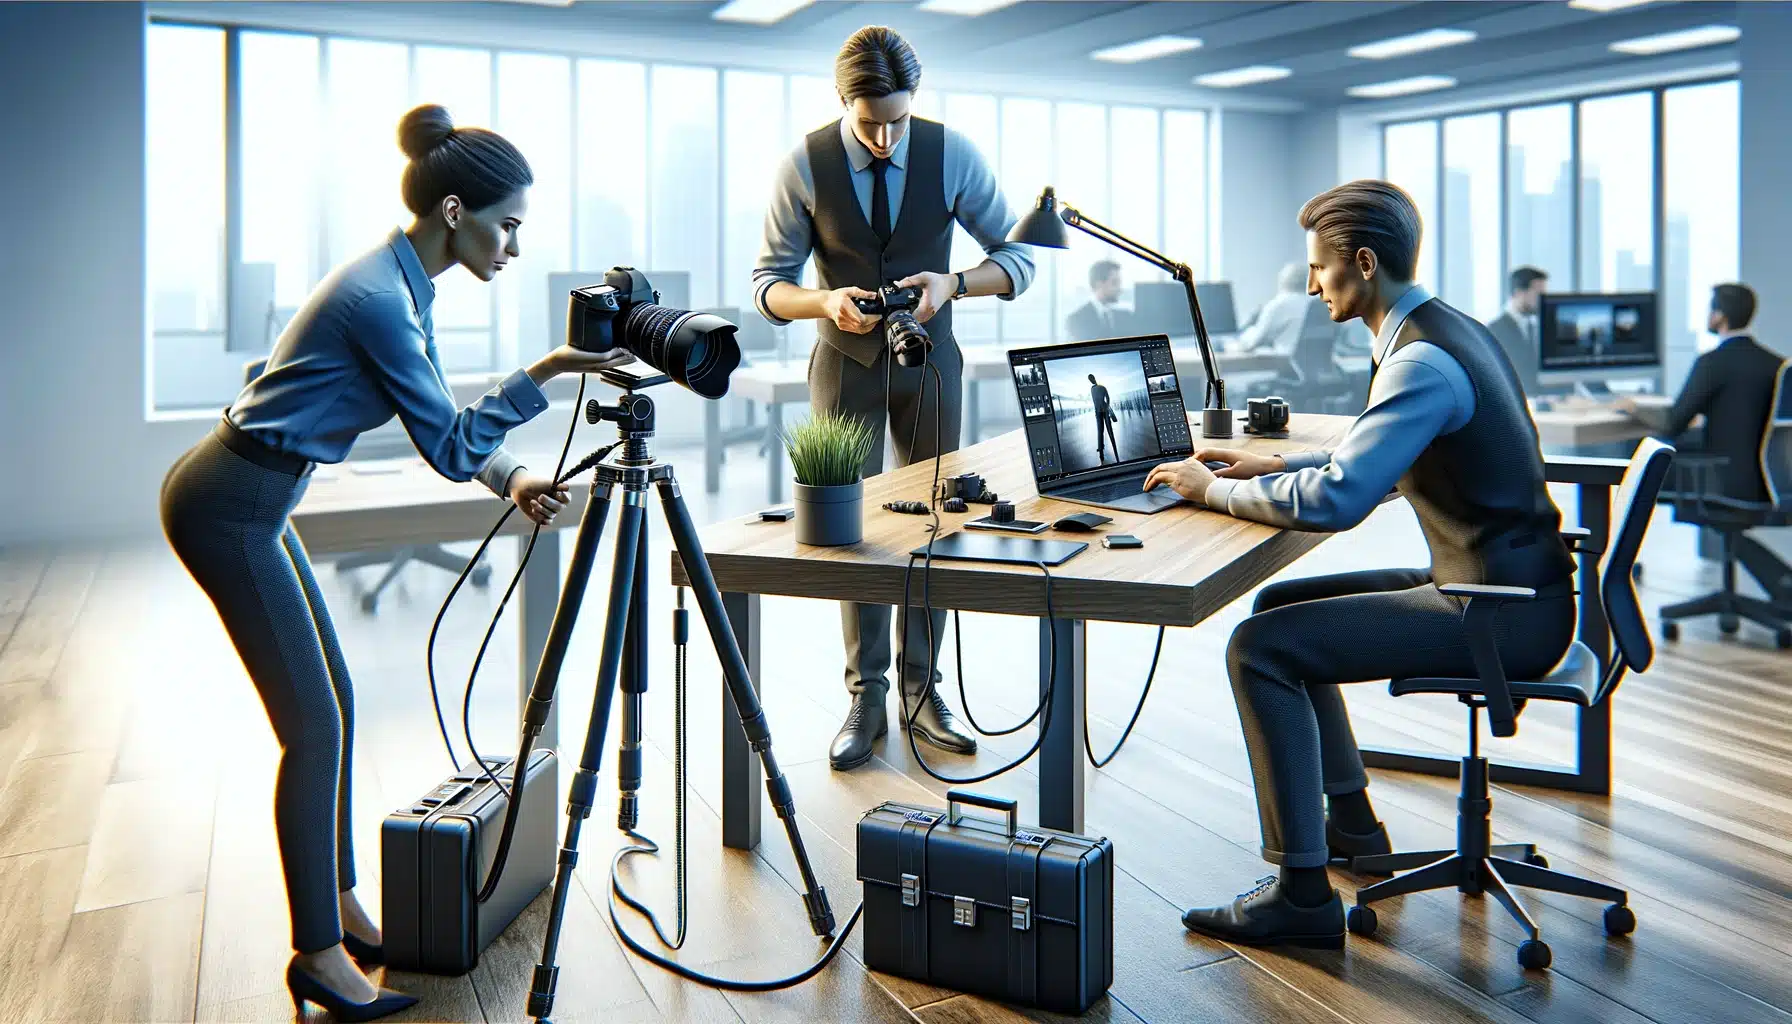 Three professionals in an office setting up a camera tethering system, with one adjusting the camera, another handling cables, and a third monitoring images on a laptop.